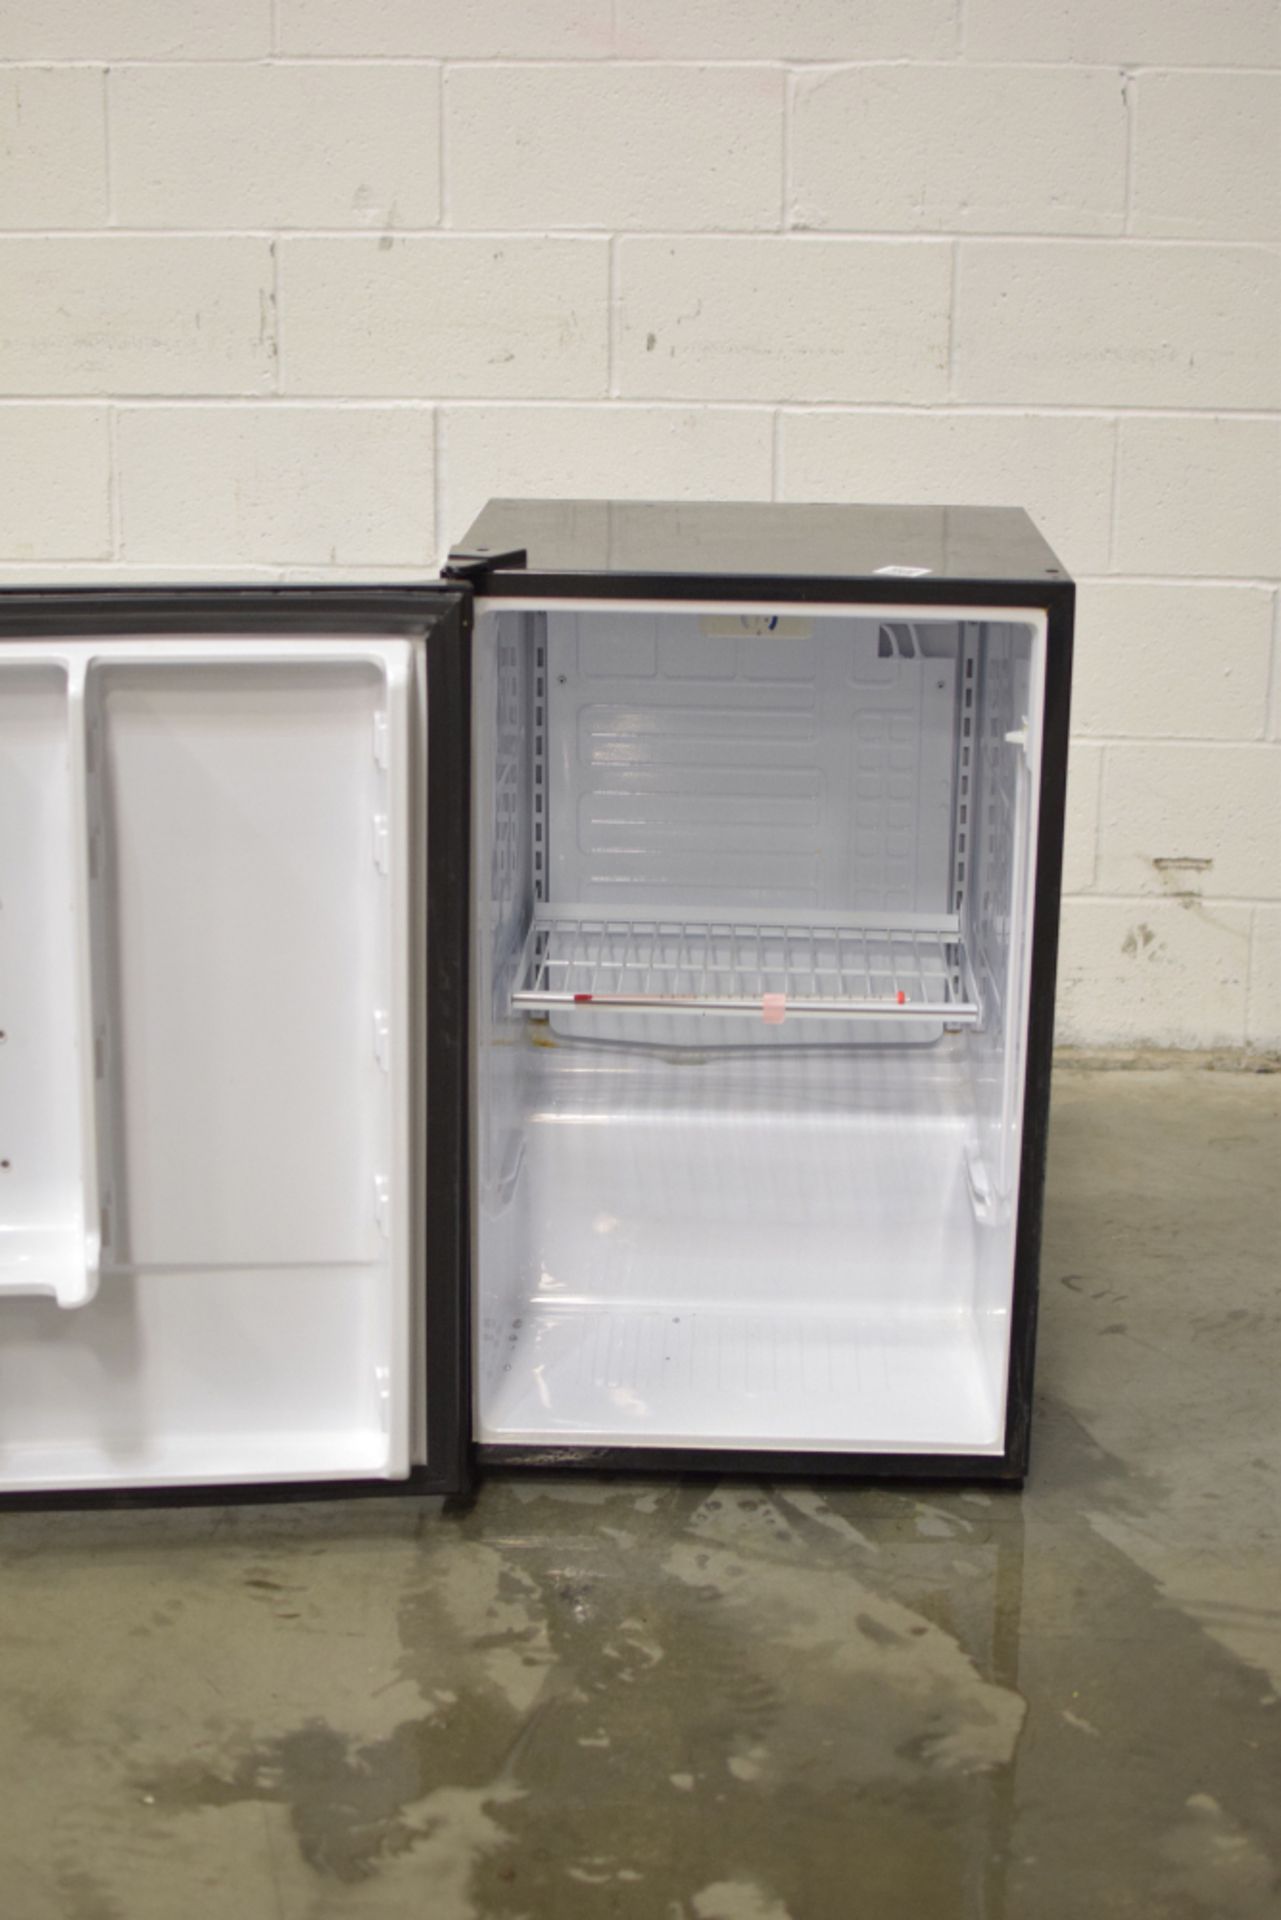 Danby Undercounter Household Refrigerator - Image 2 of 2